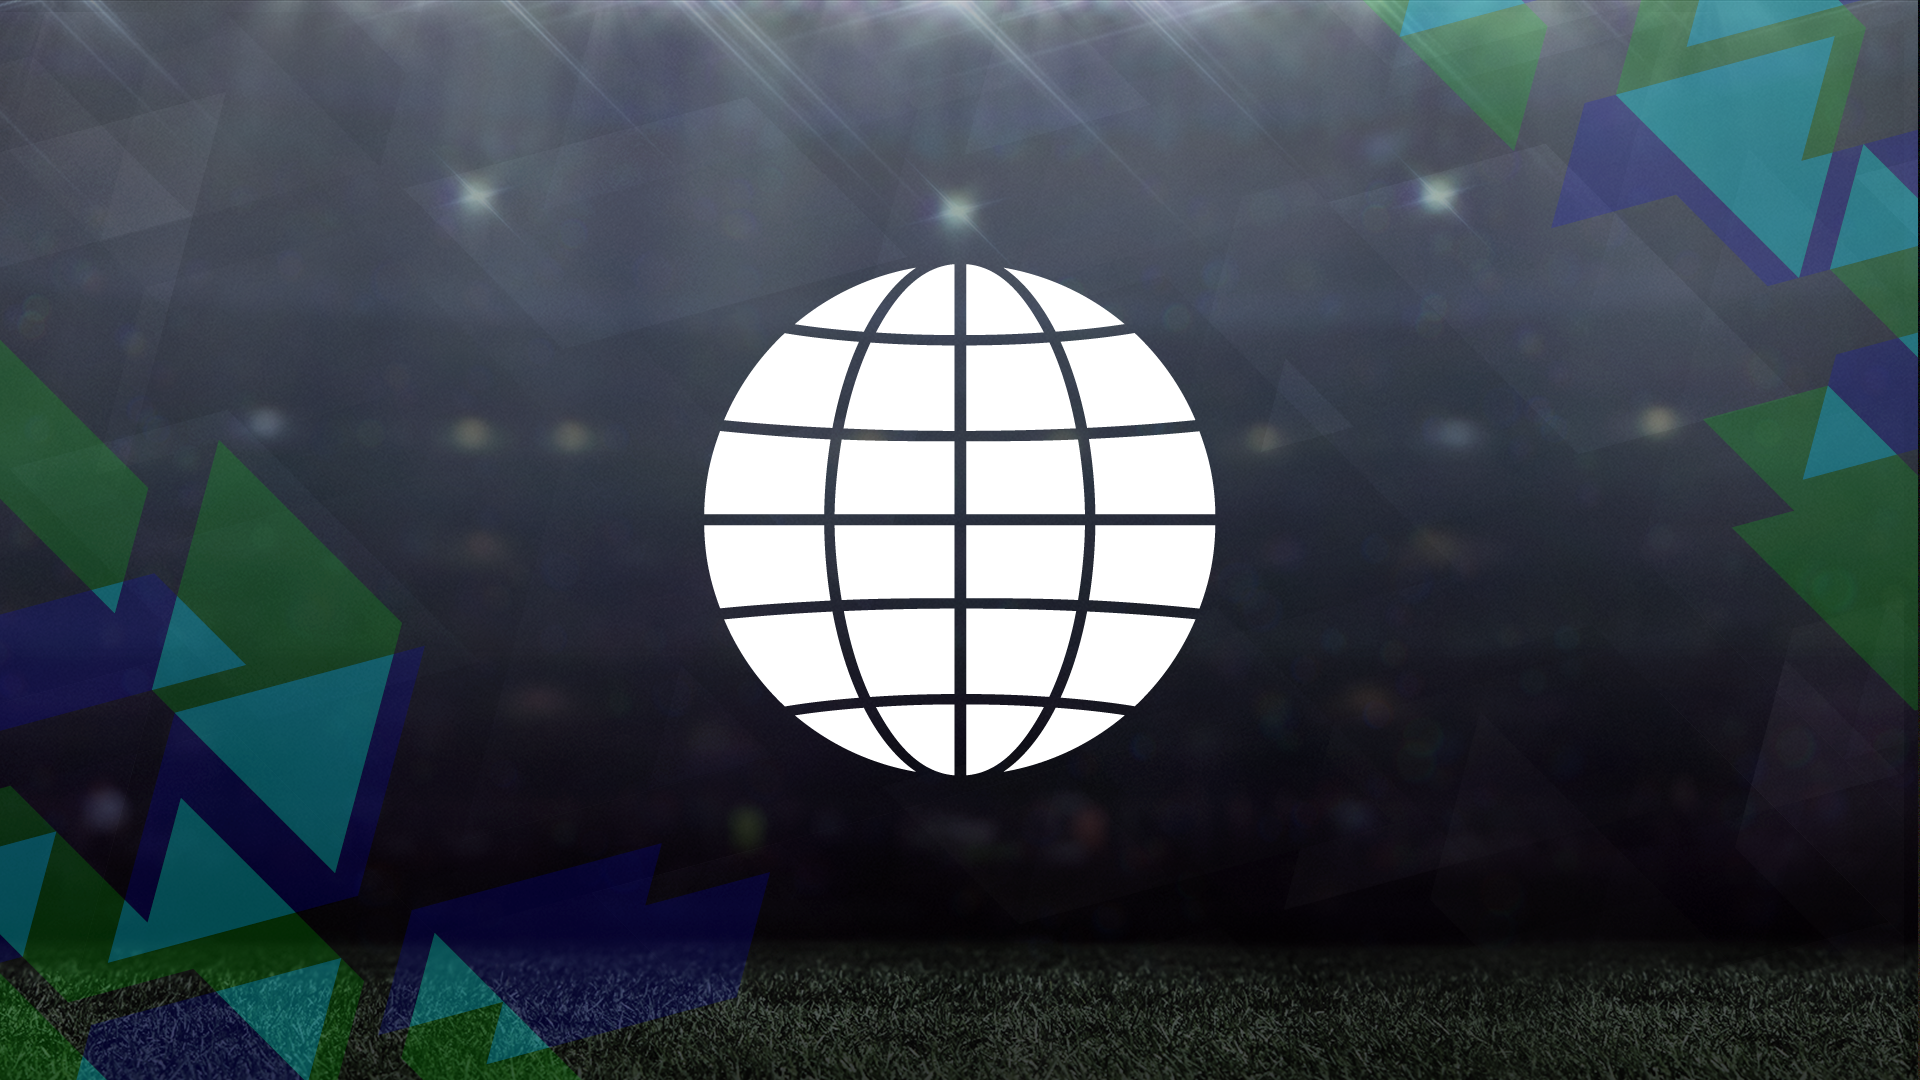 Icon for Promoted in Online Divisions